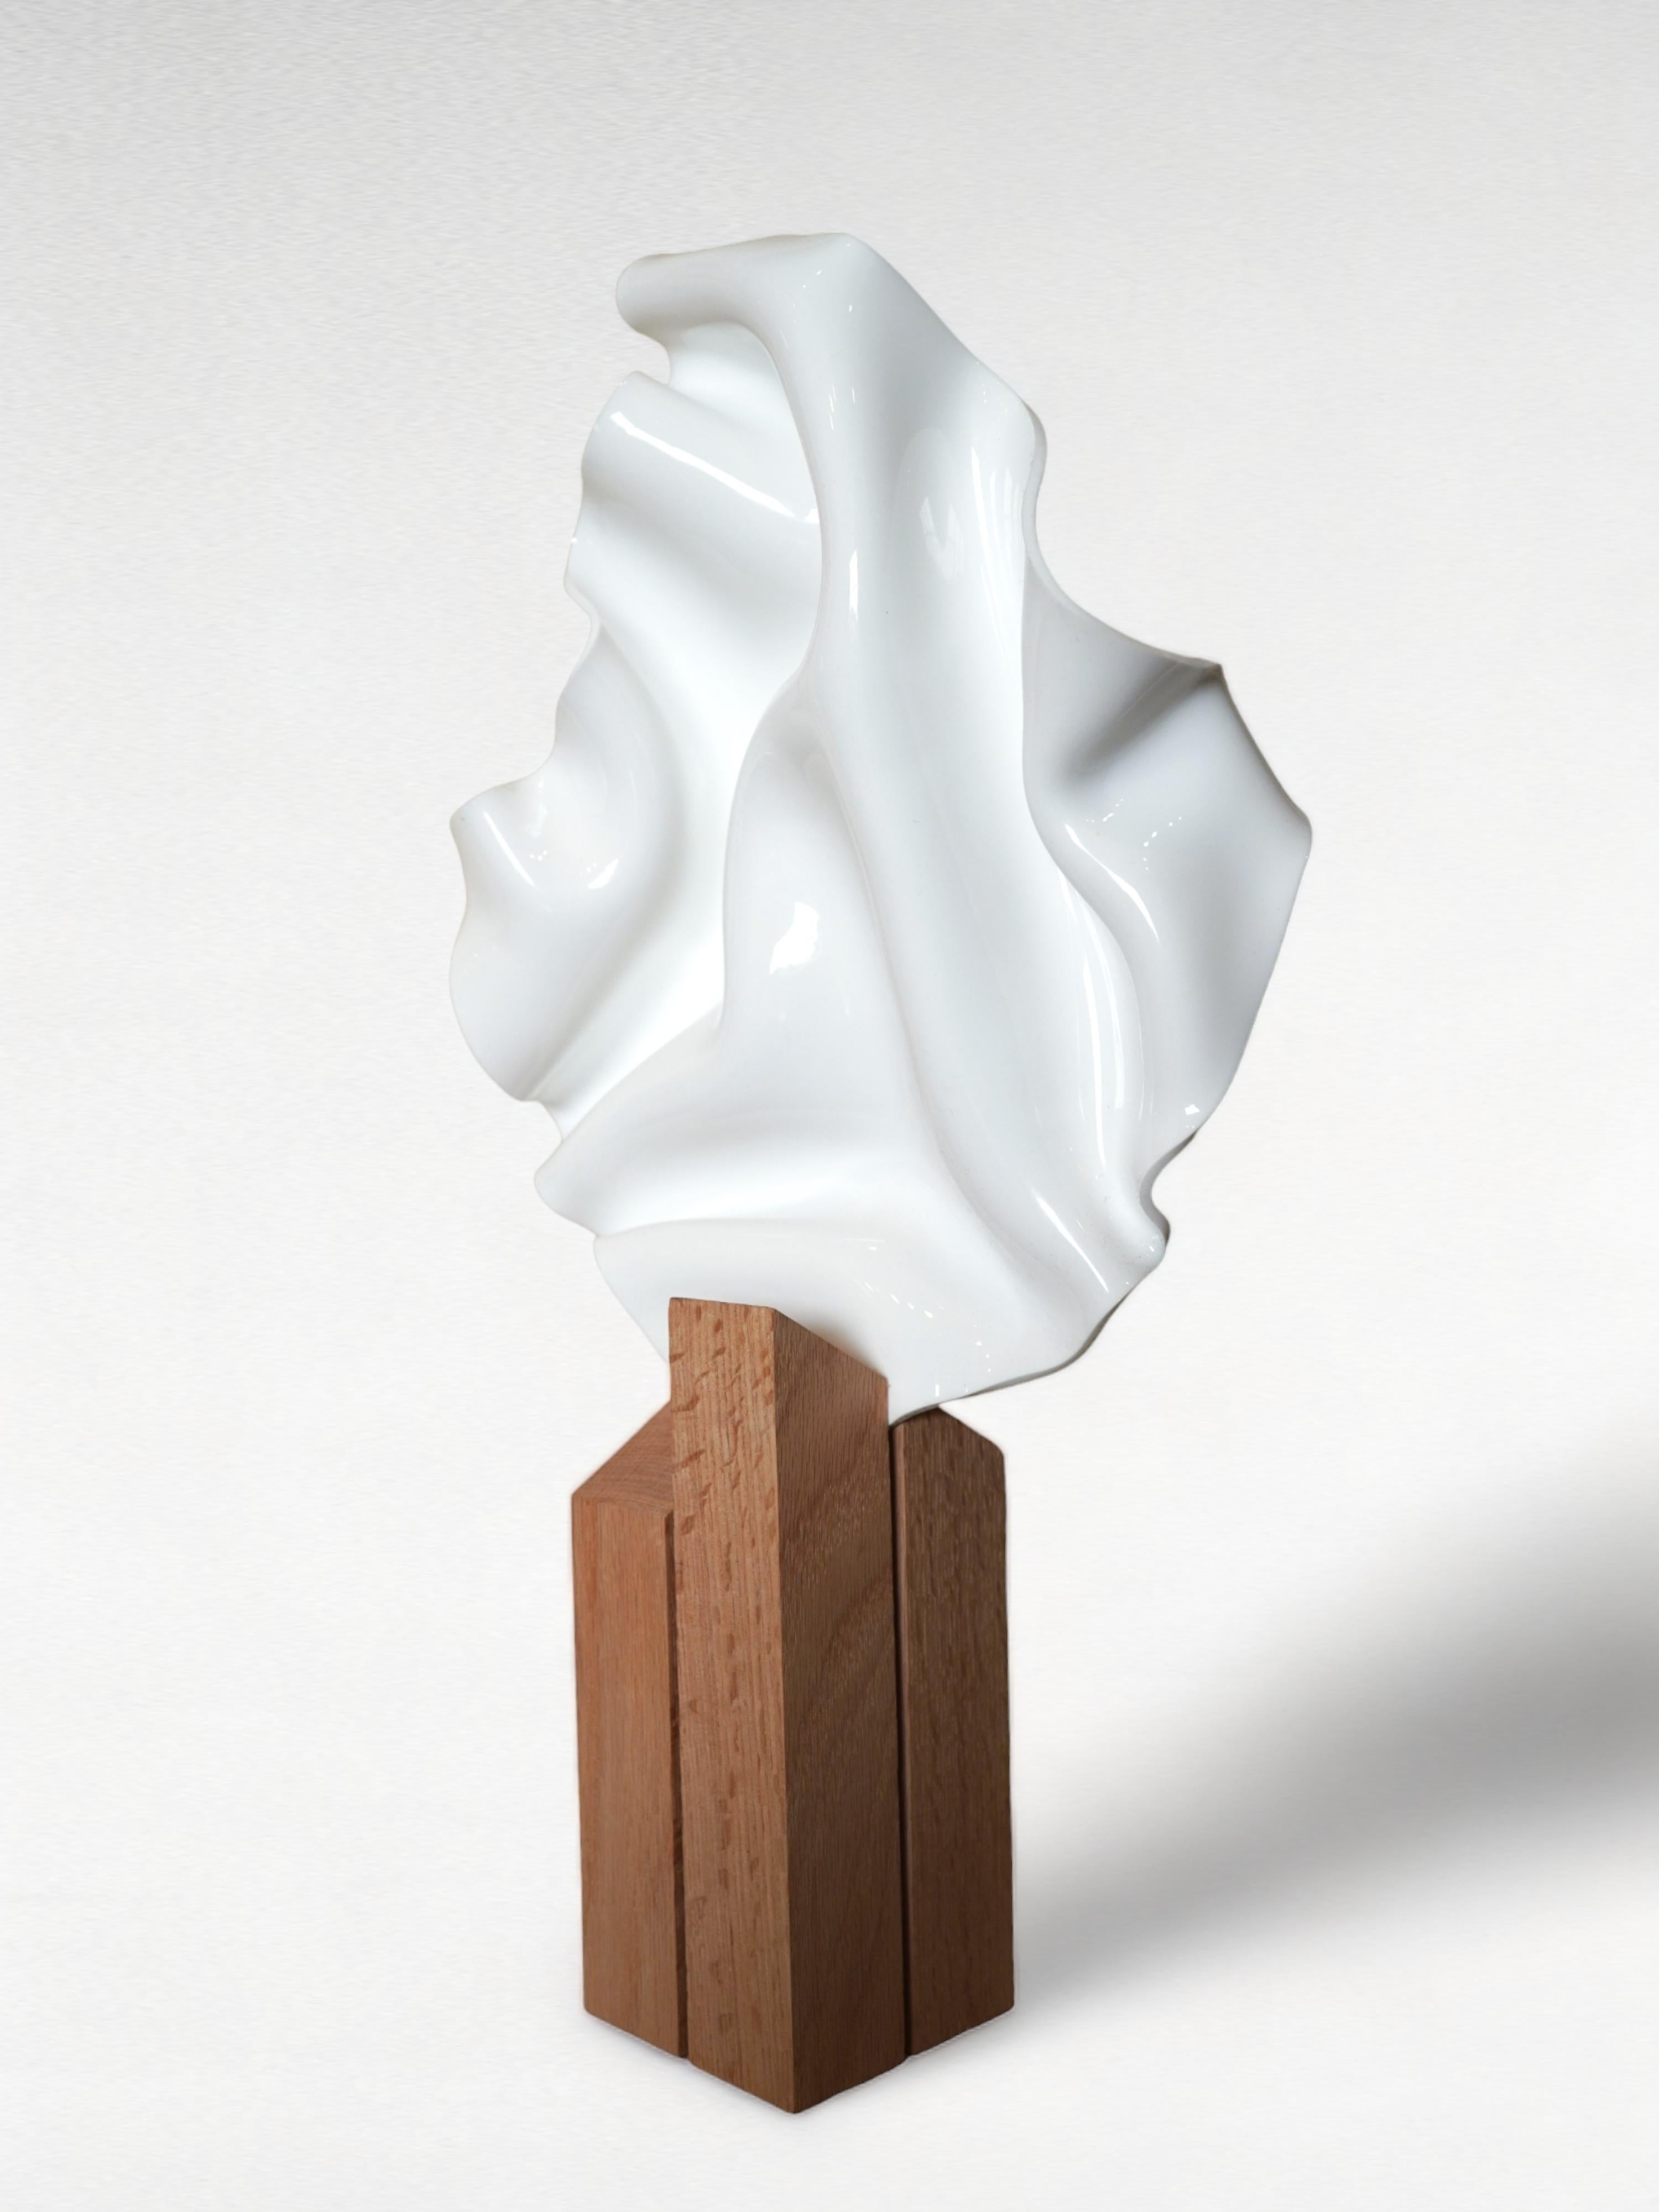 IVORY HARMONY, Pedestal Sculpture hand-formed acrylic and oak pedestal For Sale 1